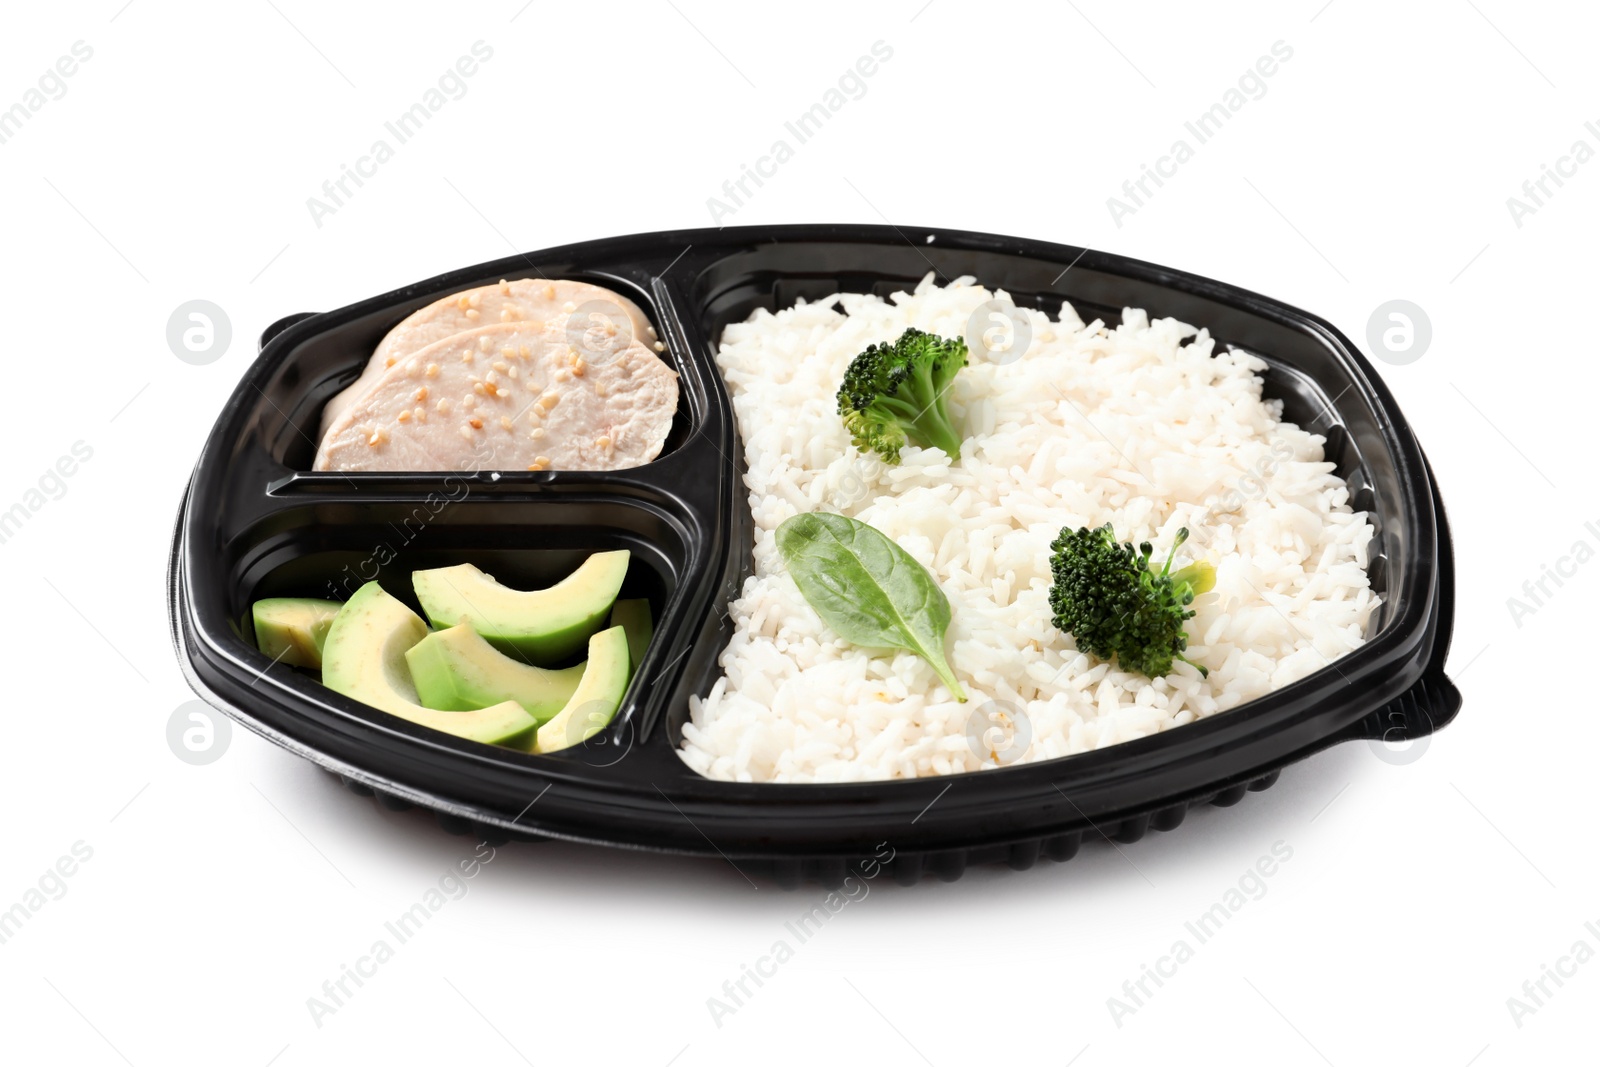 Photo of Container with natural protein food on white background